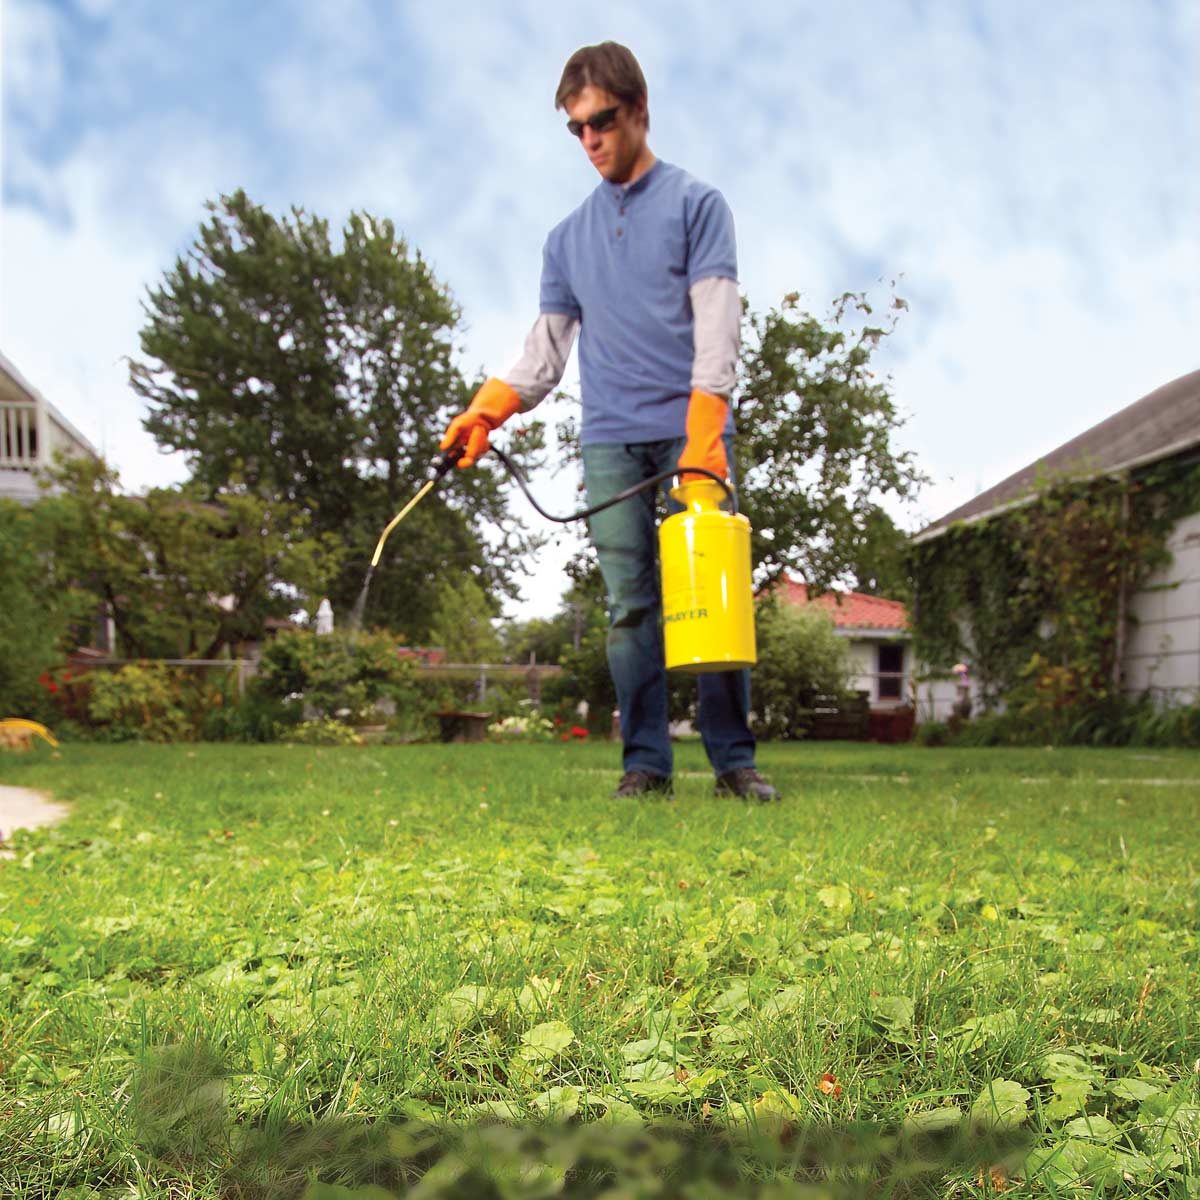 Best Weed Killer: How to Get Rid of Weeds in Grass